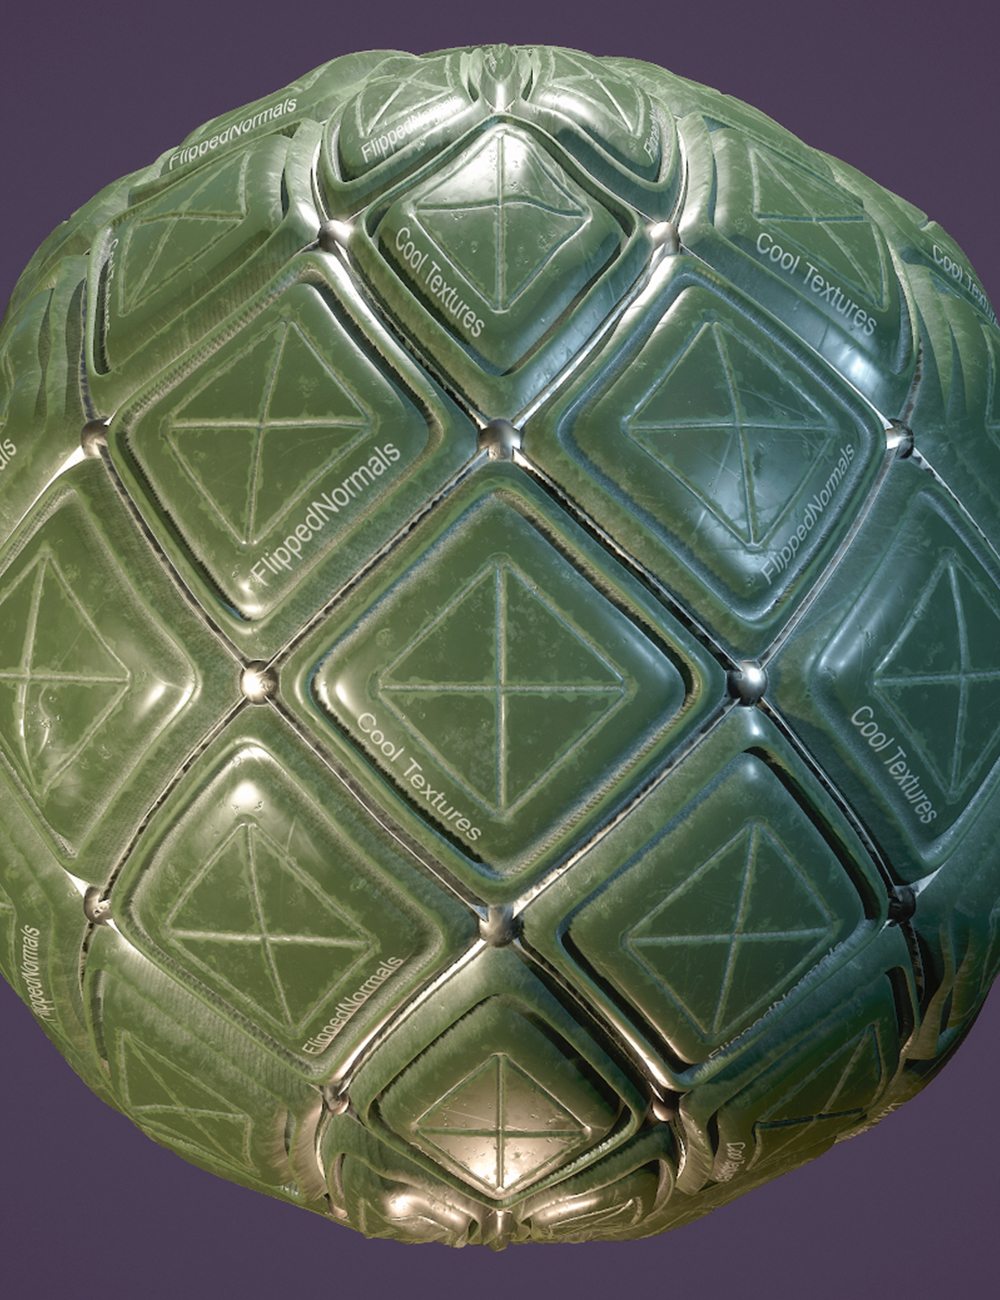 Introduction to Substance Designer by: FlippedNormals, 3D Models by Daz 3D